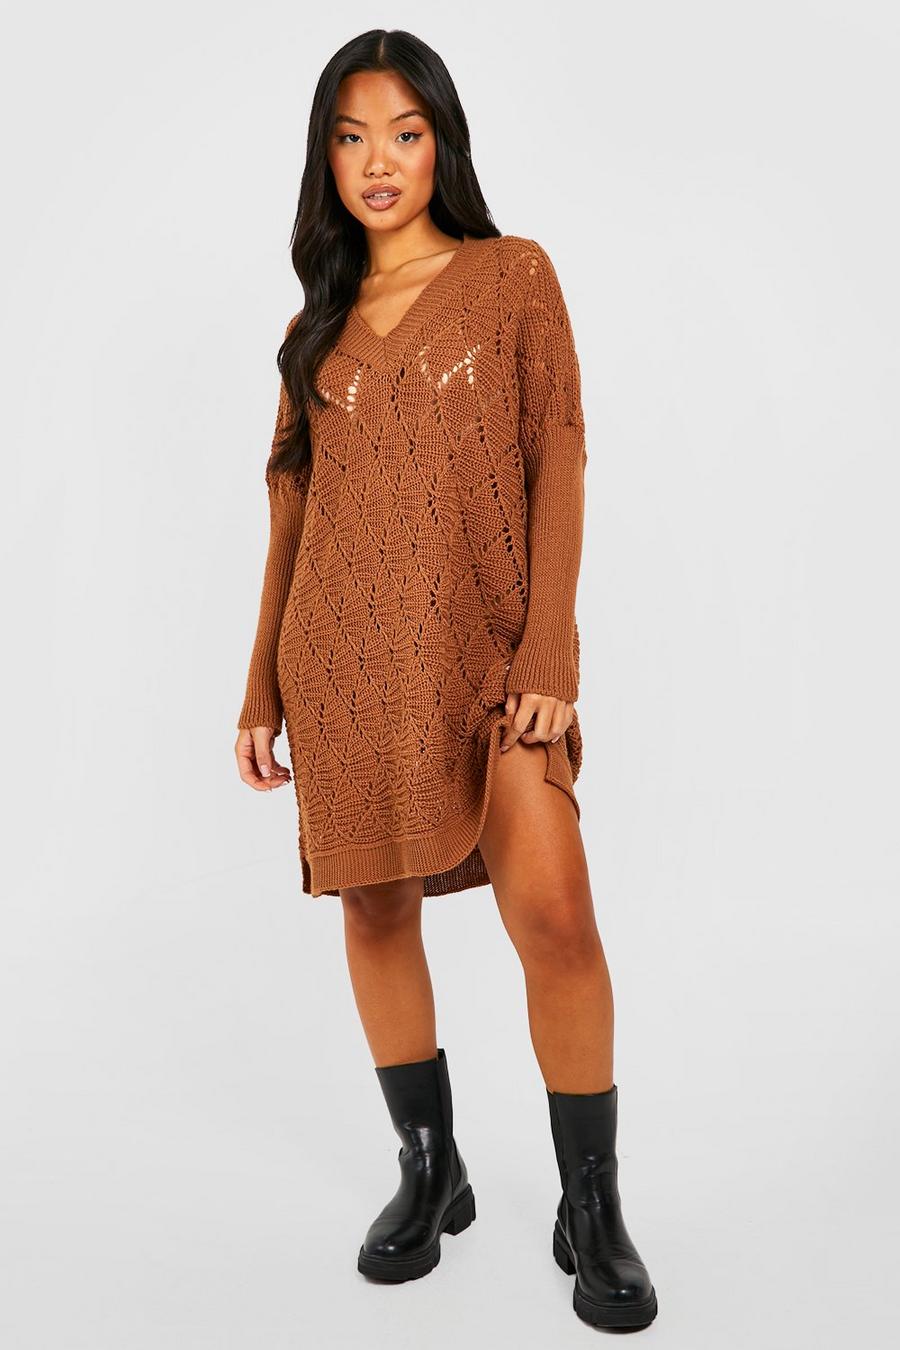 Chocolate brown Petite V Neck Knitted Swing Jumper Dress